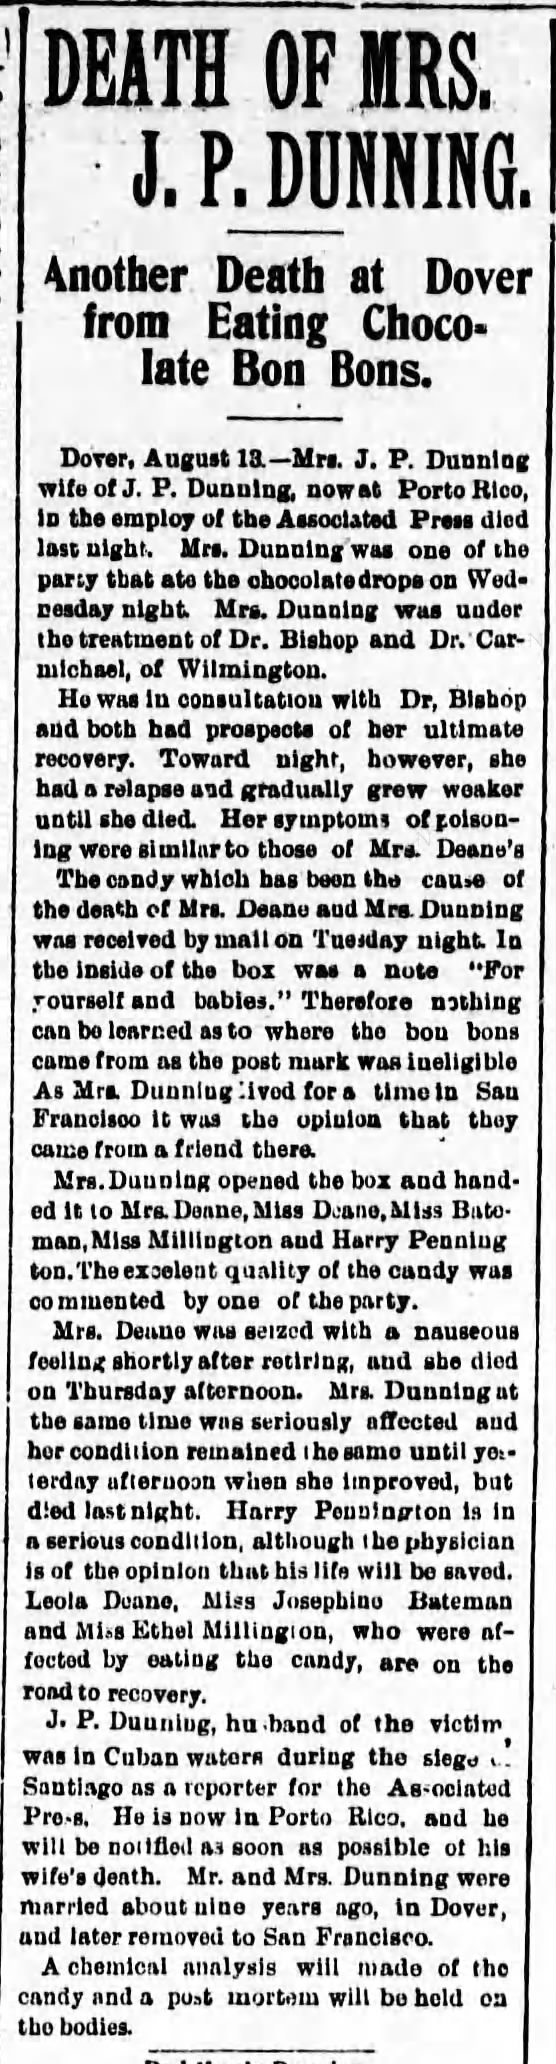 "Death of Mrs. J. P. Dunning" "Another Death at Dover from Eating Chocolate Bon Bons"